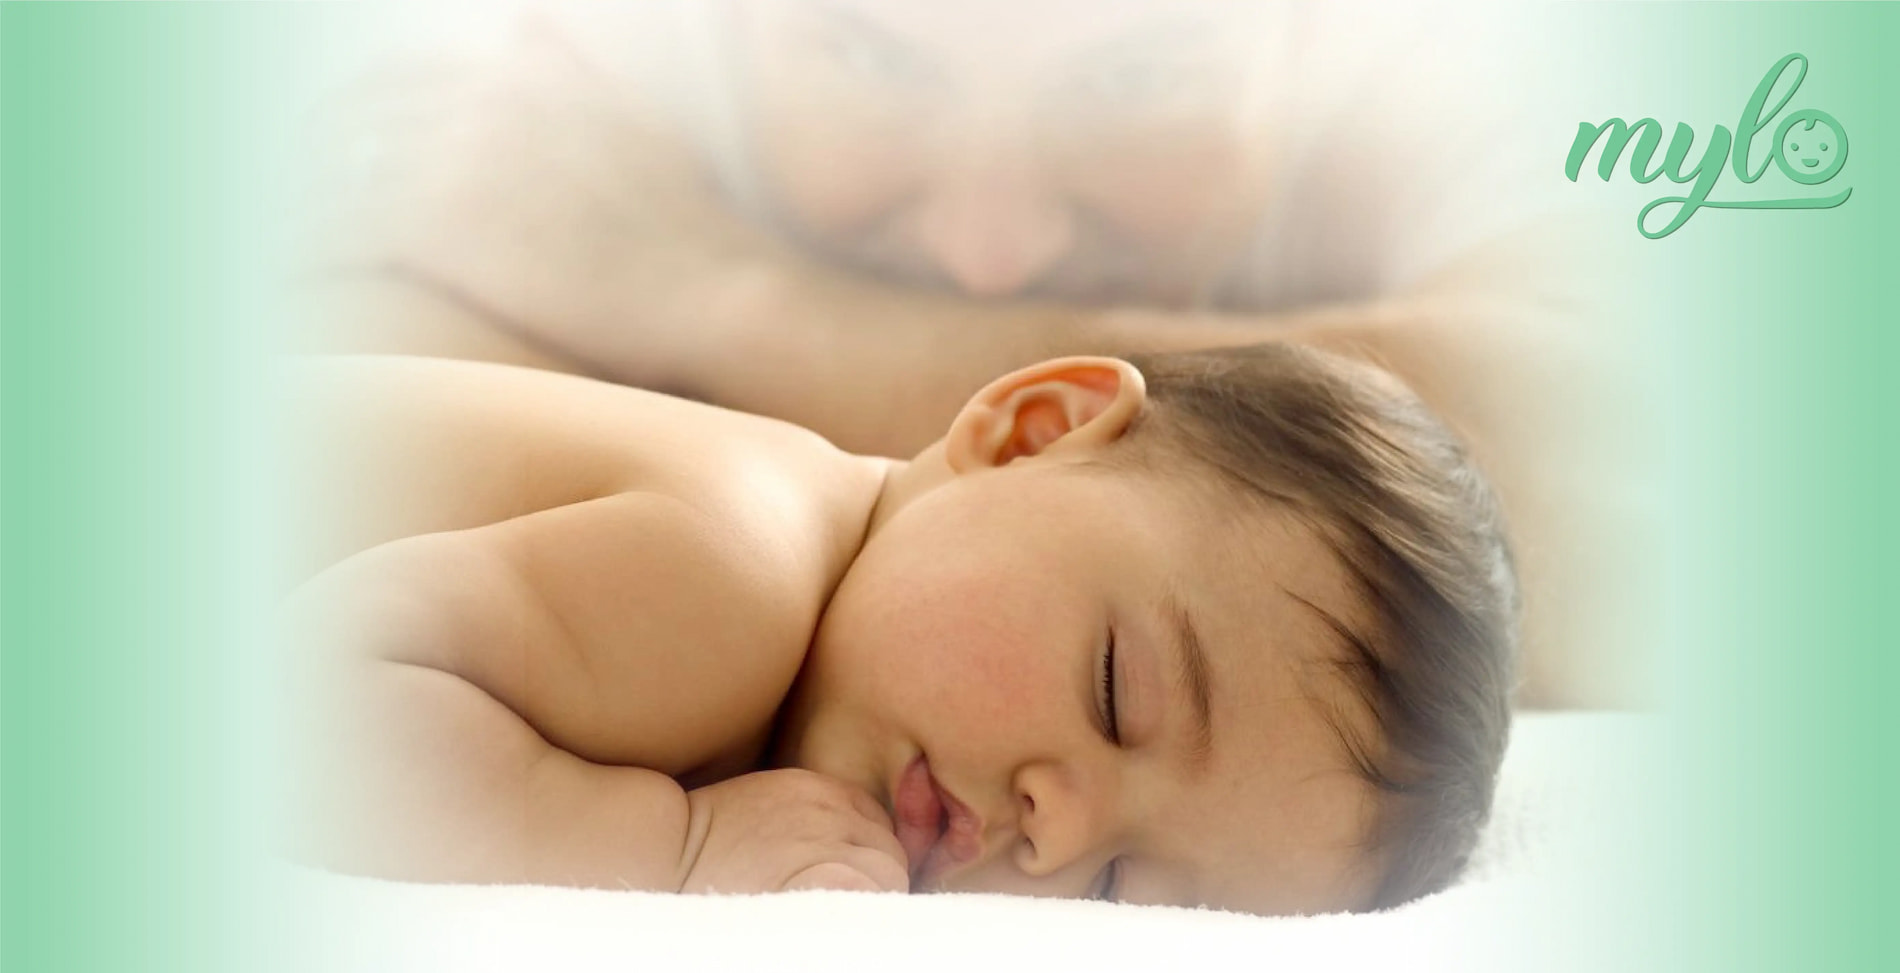 Help! My Baby Does Not Sleep! Learn More About Baby Sleep Issues and Their Solutions